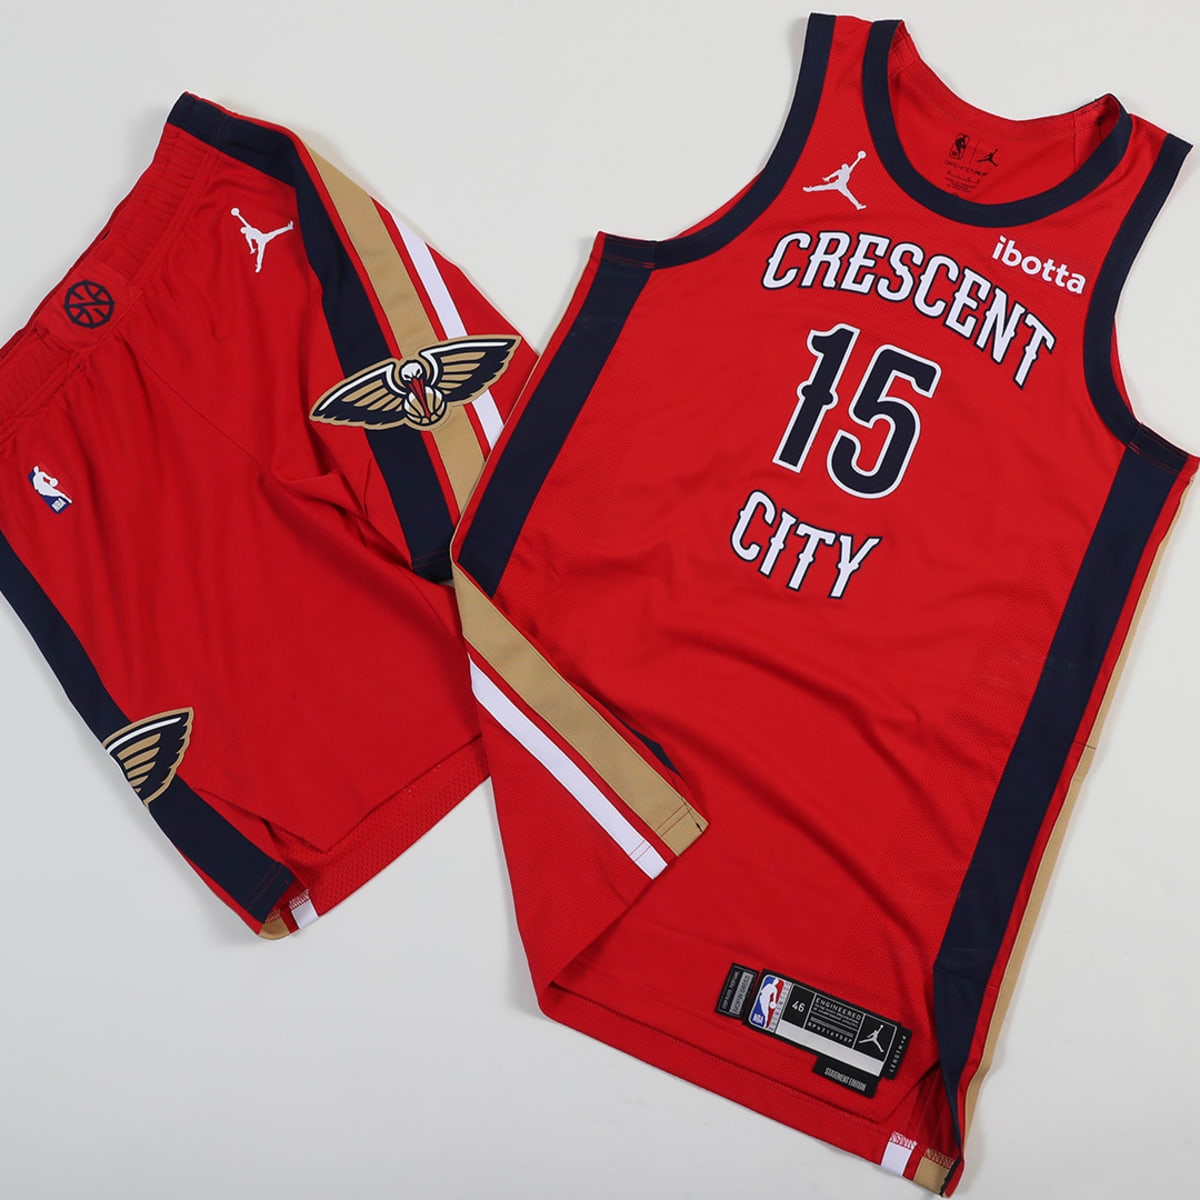 Pelicans Raise the Flag With New 2021 City Uniforms – SportsLogos.Net News